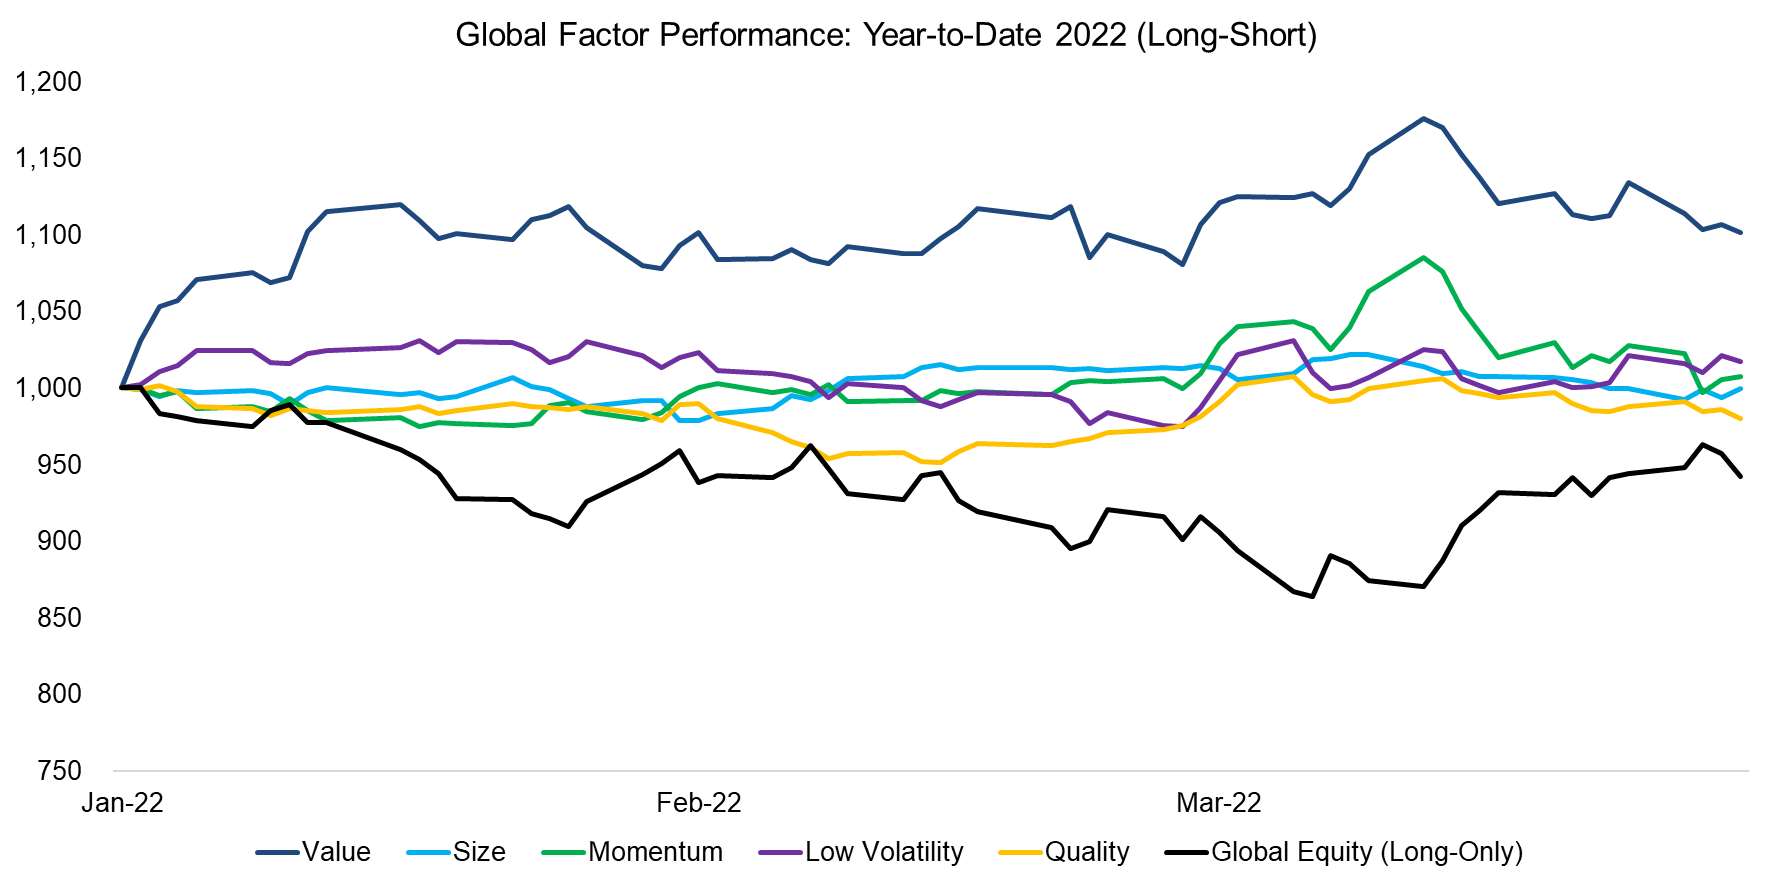 Global Factor Performance Year-to-Date 2022 (Long-Short)